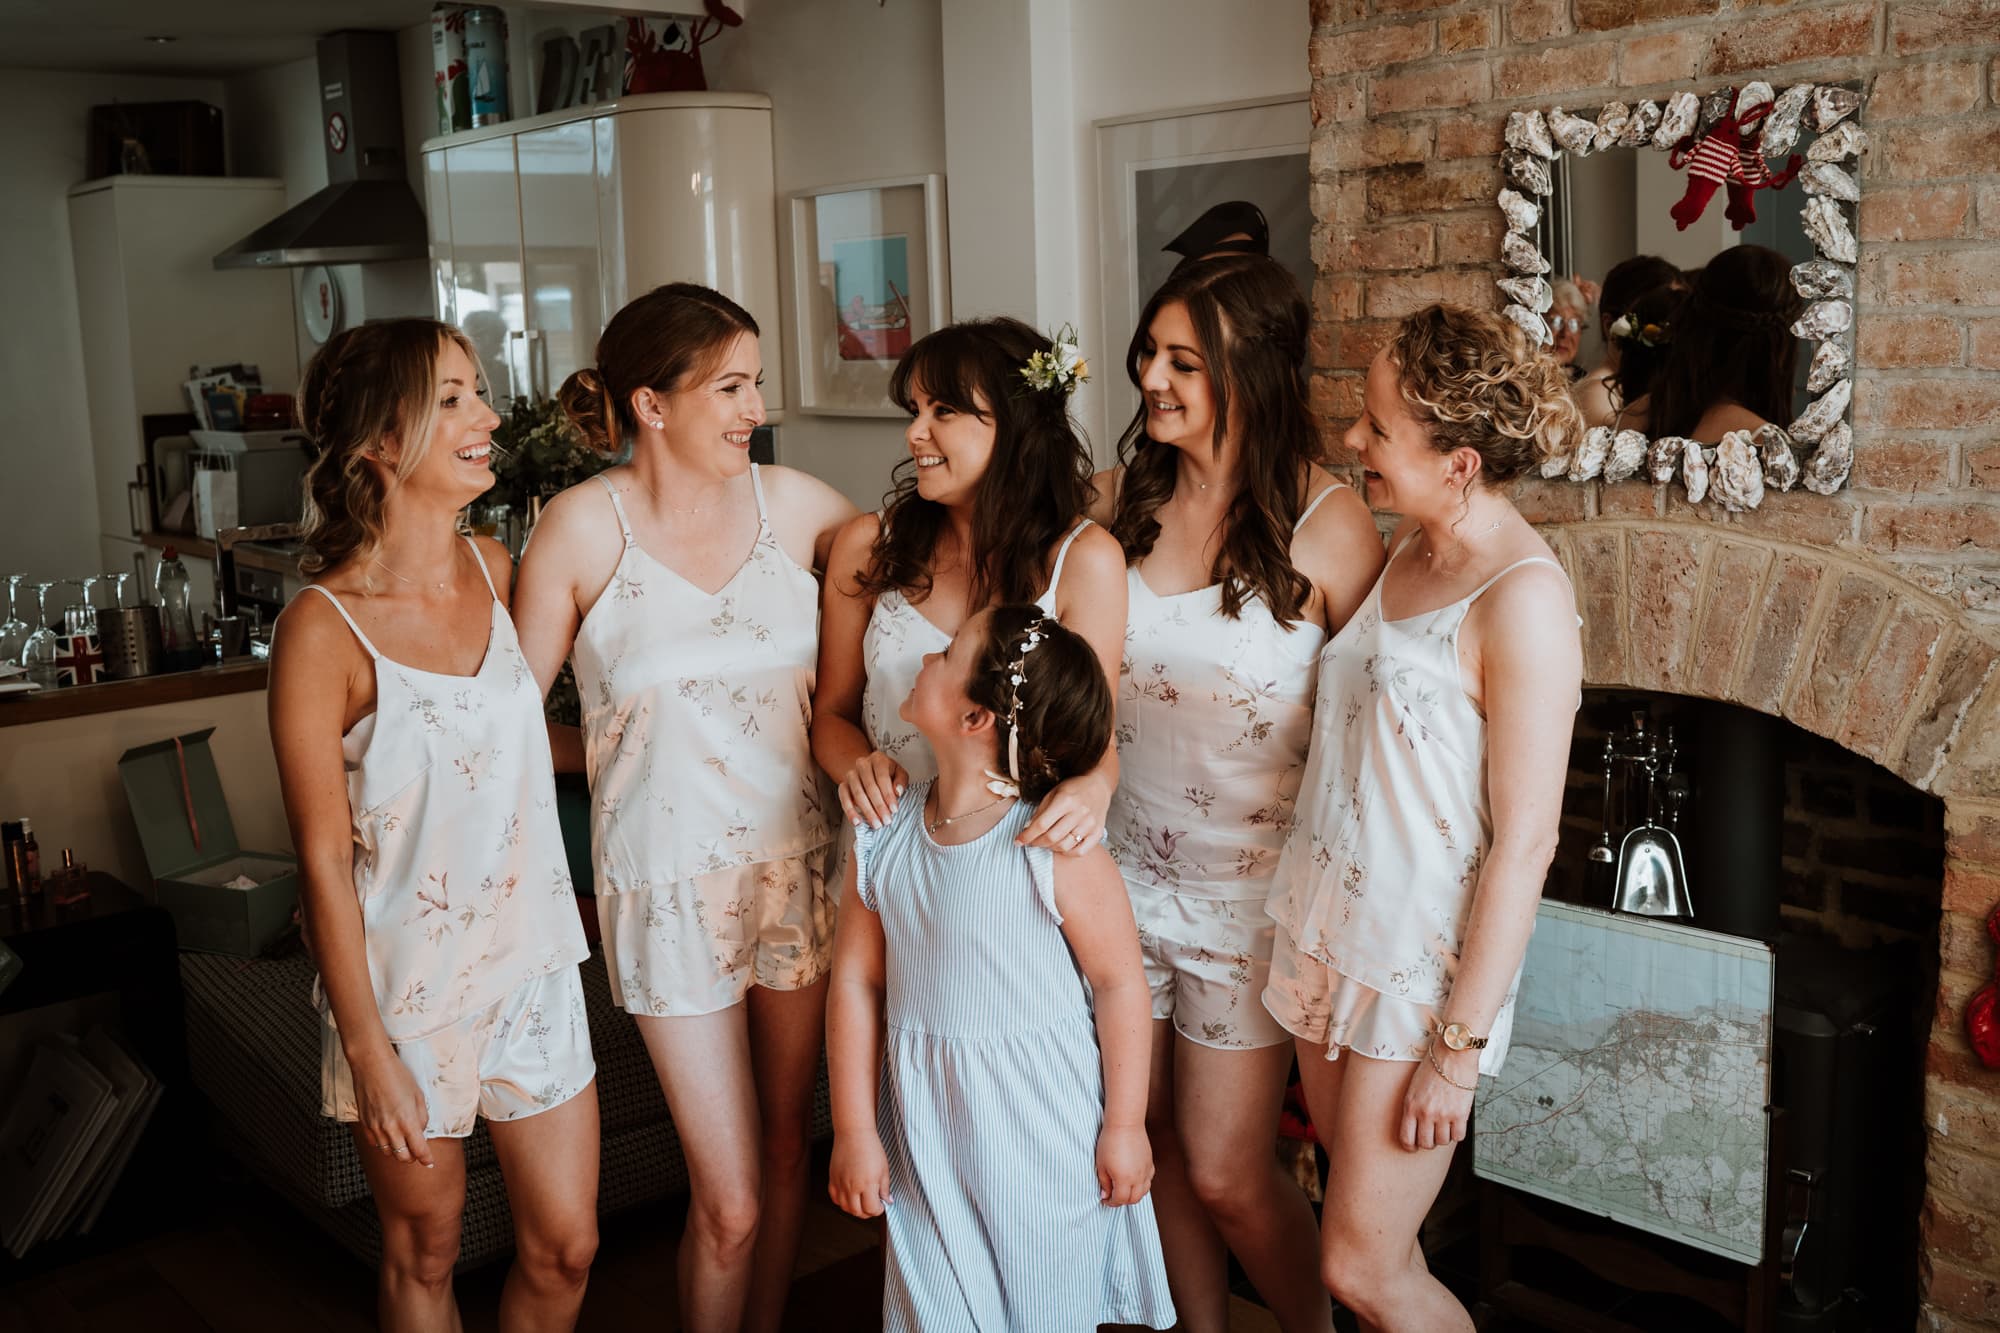 Bride and her bridesmaids in matching pyjamas looking relaxed and smiling at each other